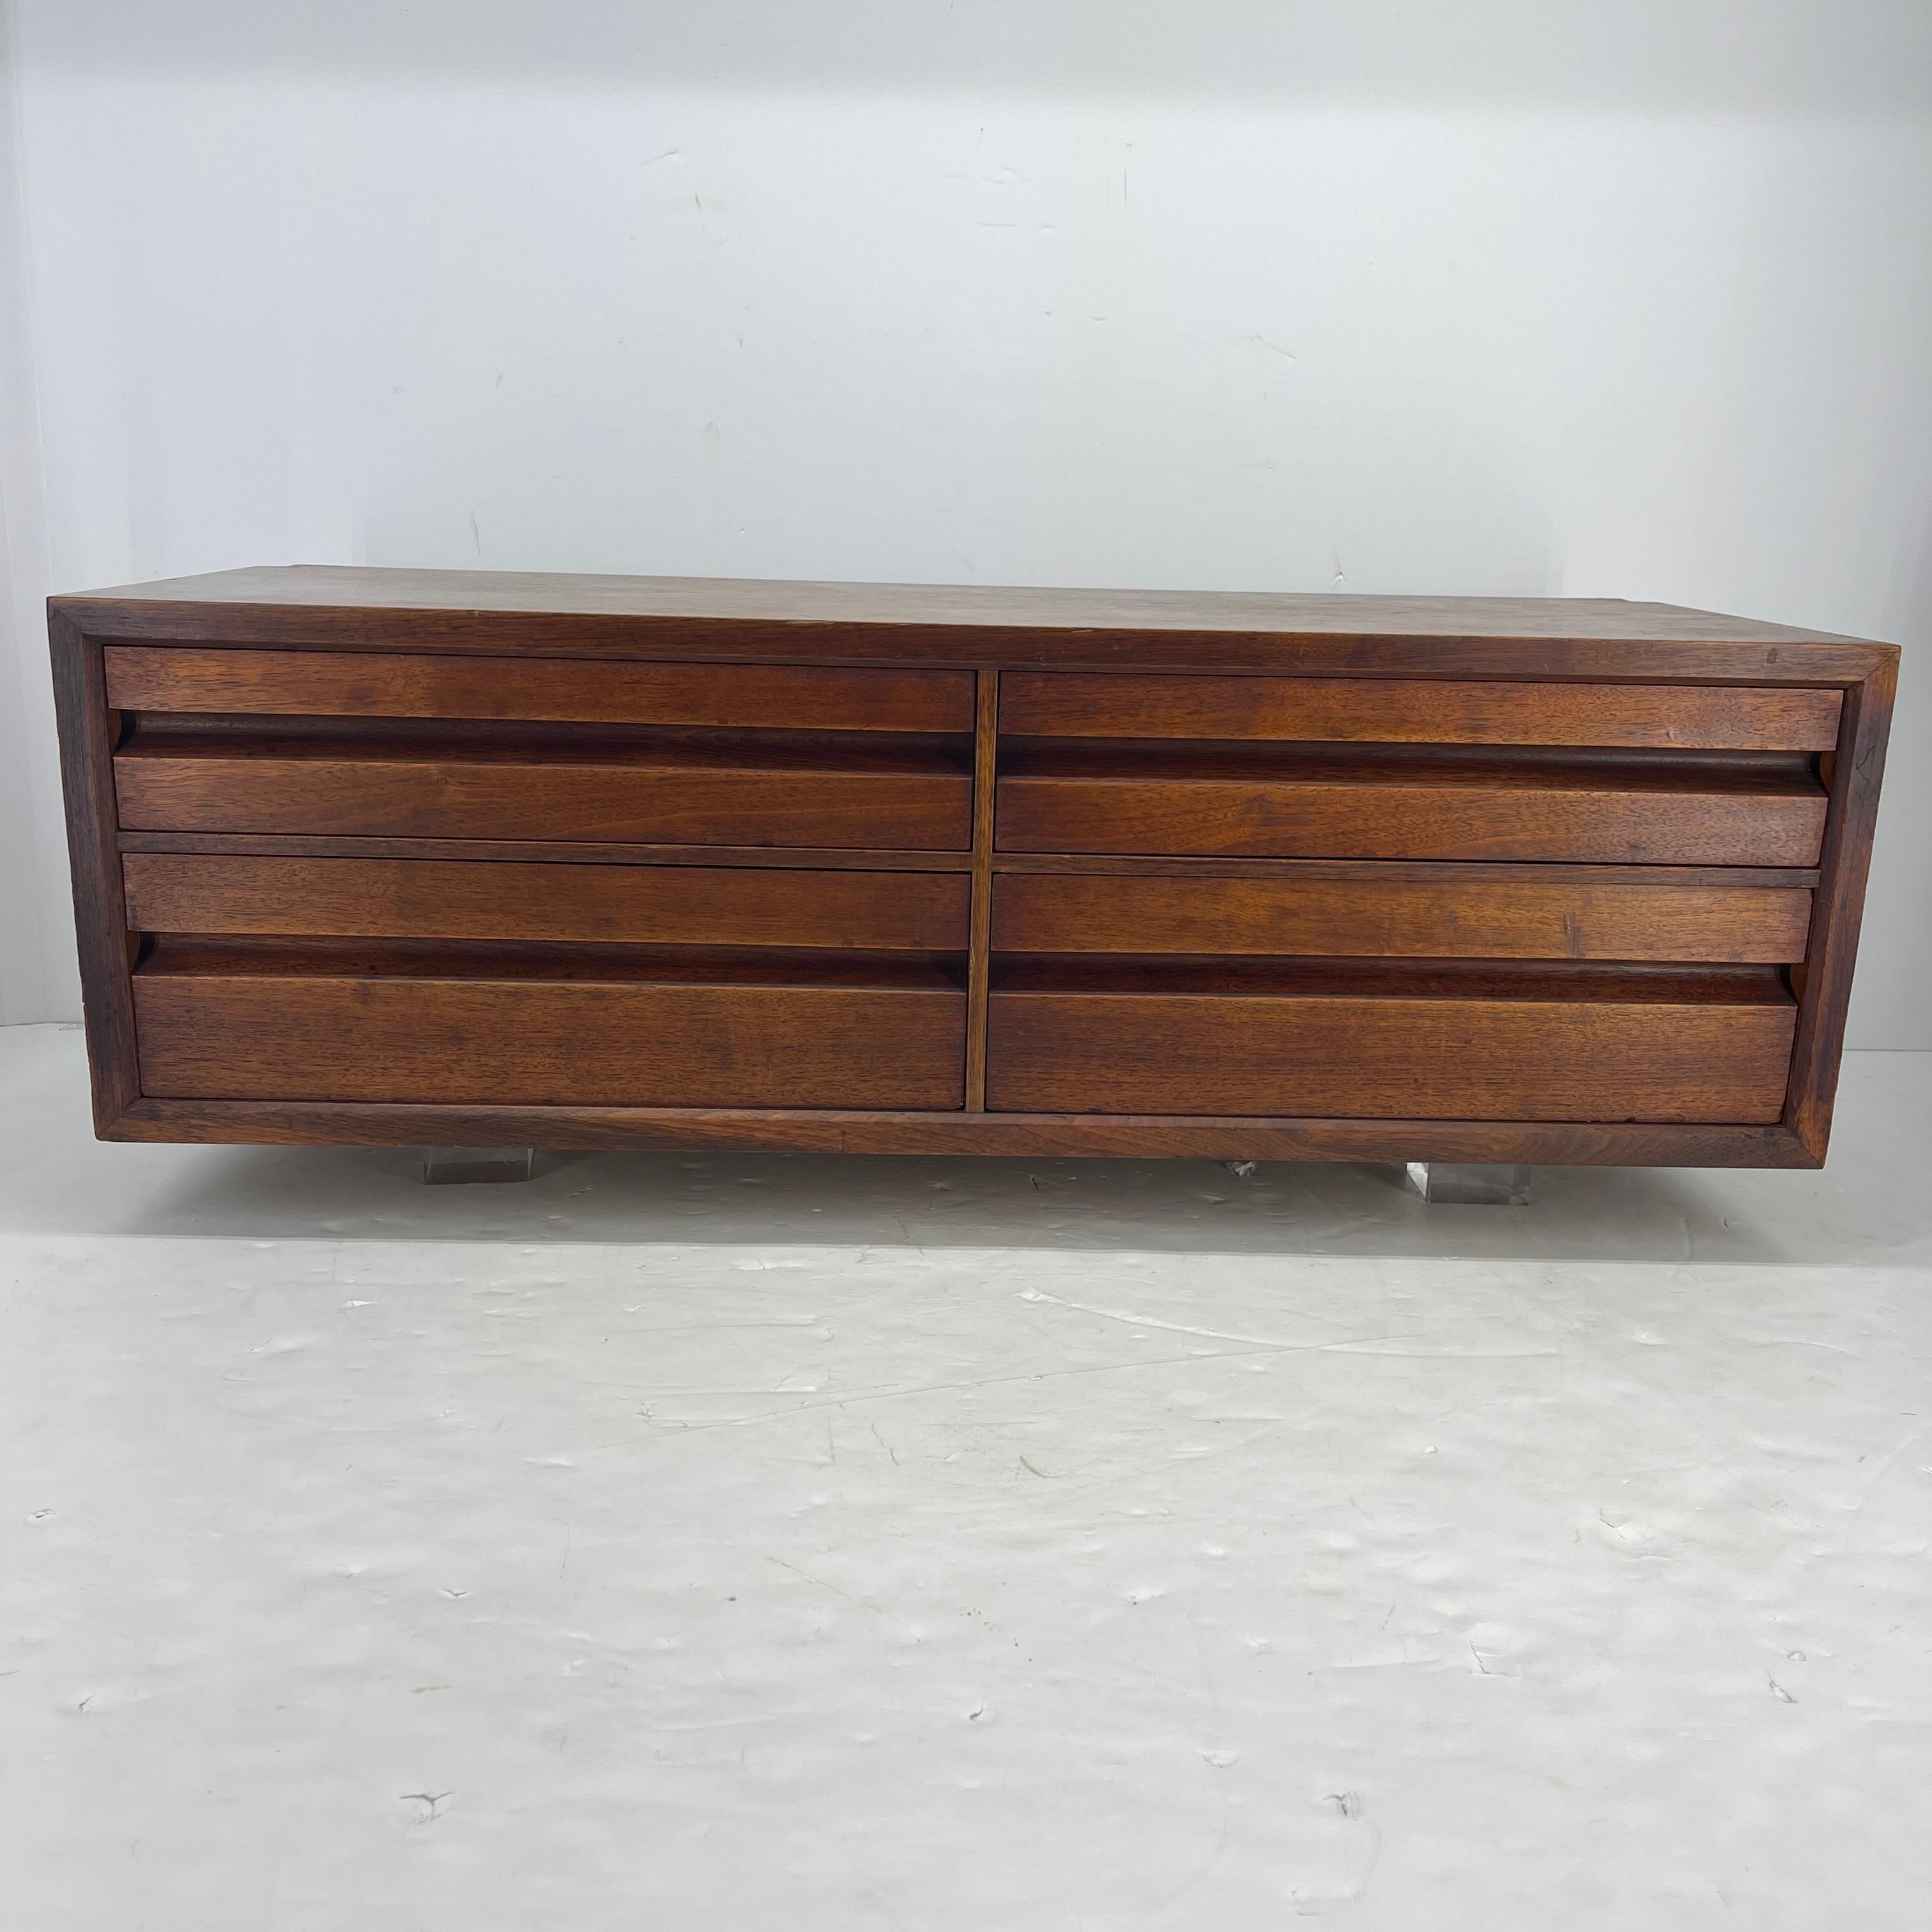 Danish Mid-Century Modern 4 drawer desk organizer. This beautiful walnut organizer is perfect for storing your letters or stationary. It also would be beautiful in a dressing room or on top of a vanity for jewelry or personal items. The drawers are